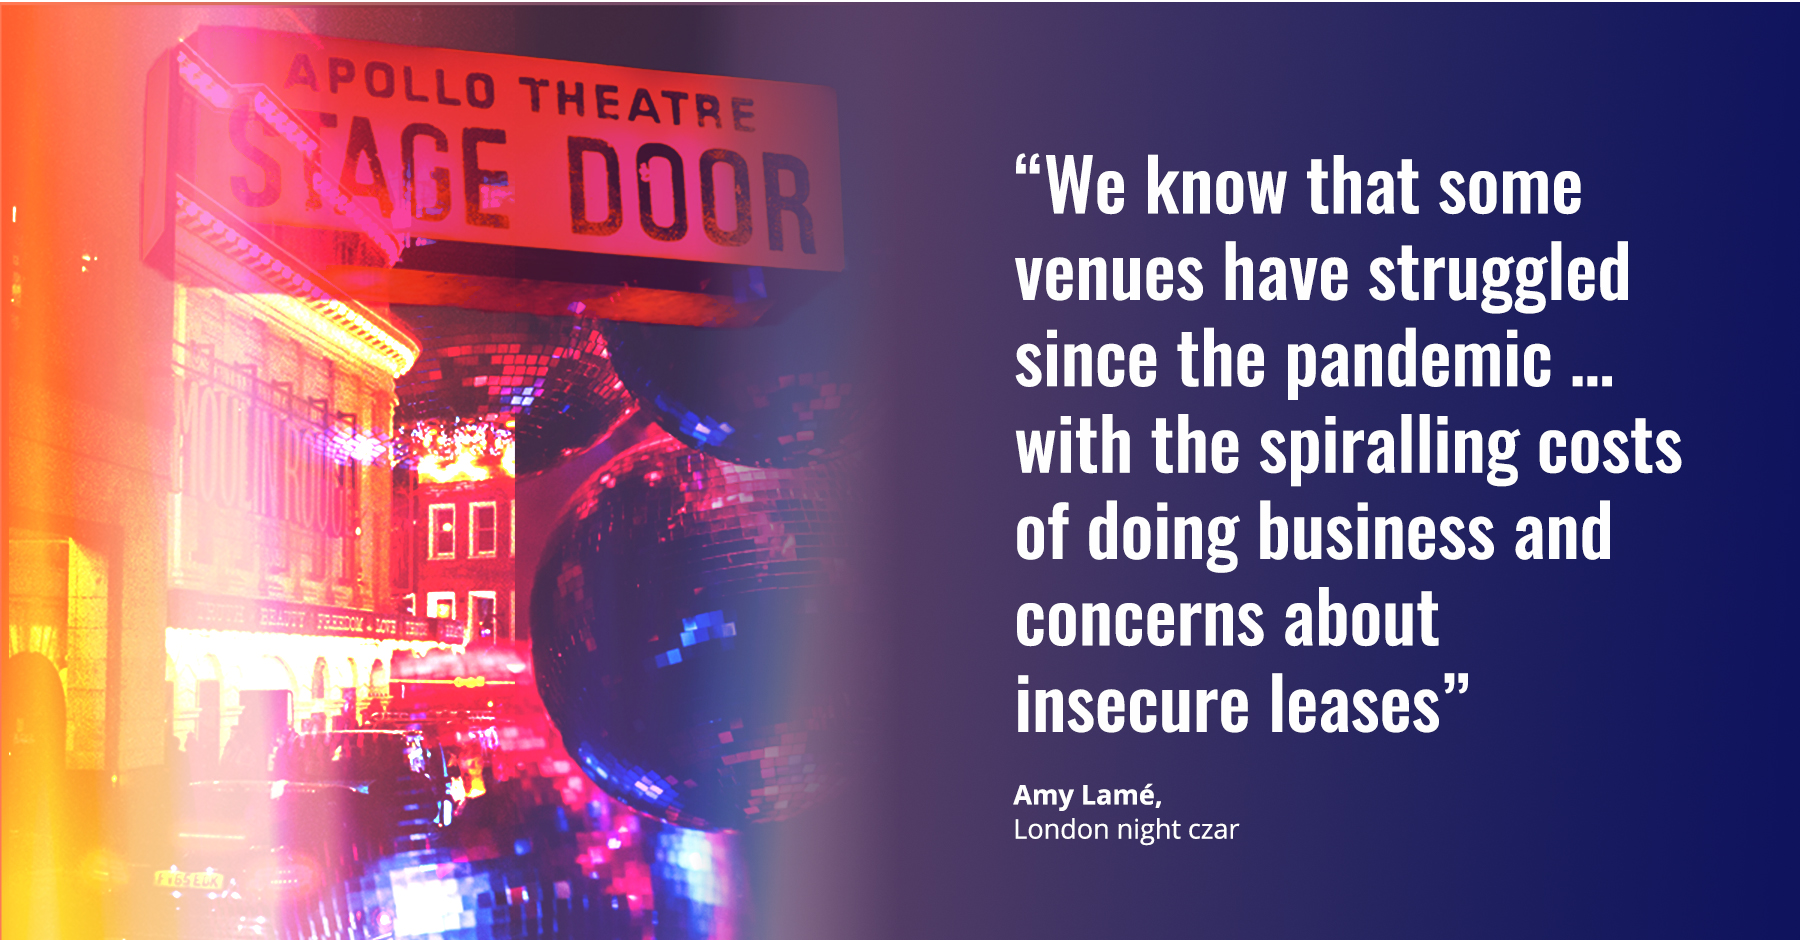 Collage of theatre, stage door sign and disco balls with quote